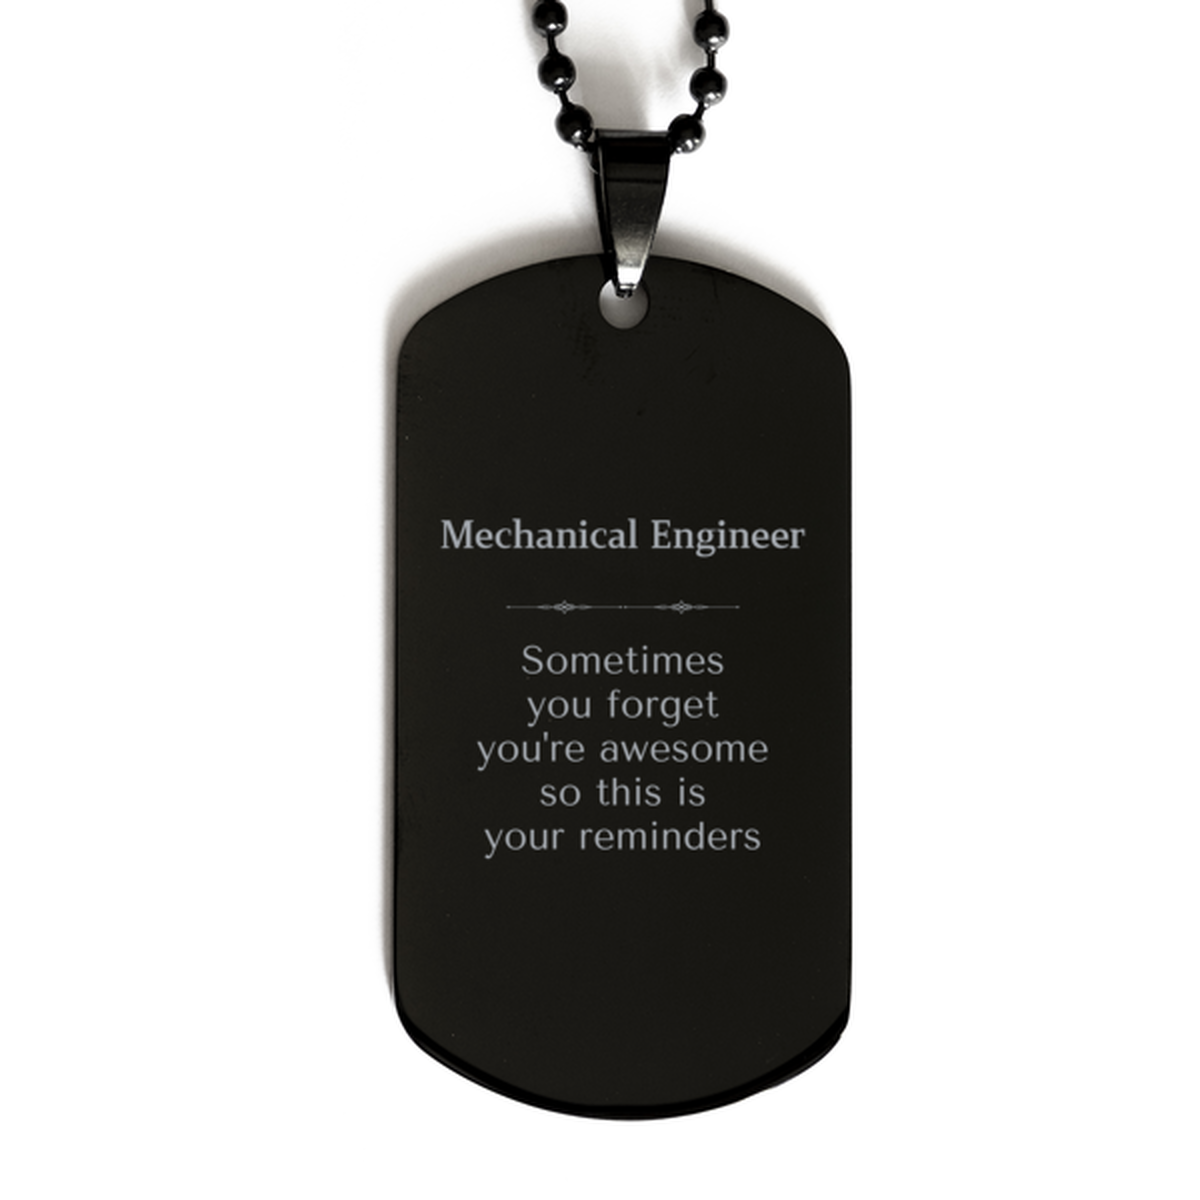 Sentimental Mechanical Engineer Black Dog Tag, Mechanical Engineer Sometimes you forget you're awesome so this is your reminders, Graduation Christmas Birthday Gifts for Mechanical Engineer, Men, Women, Coworkers